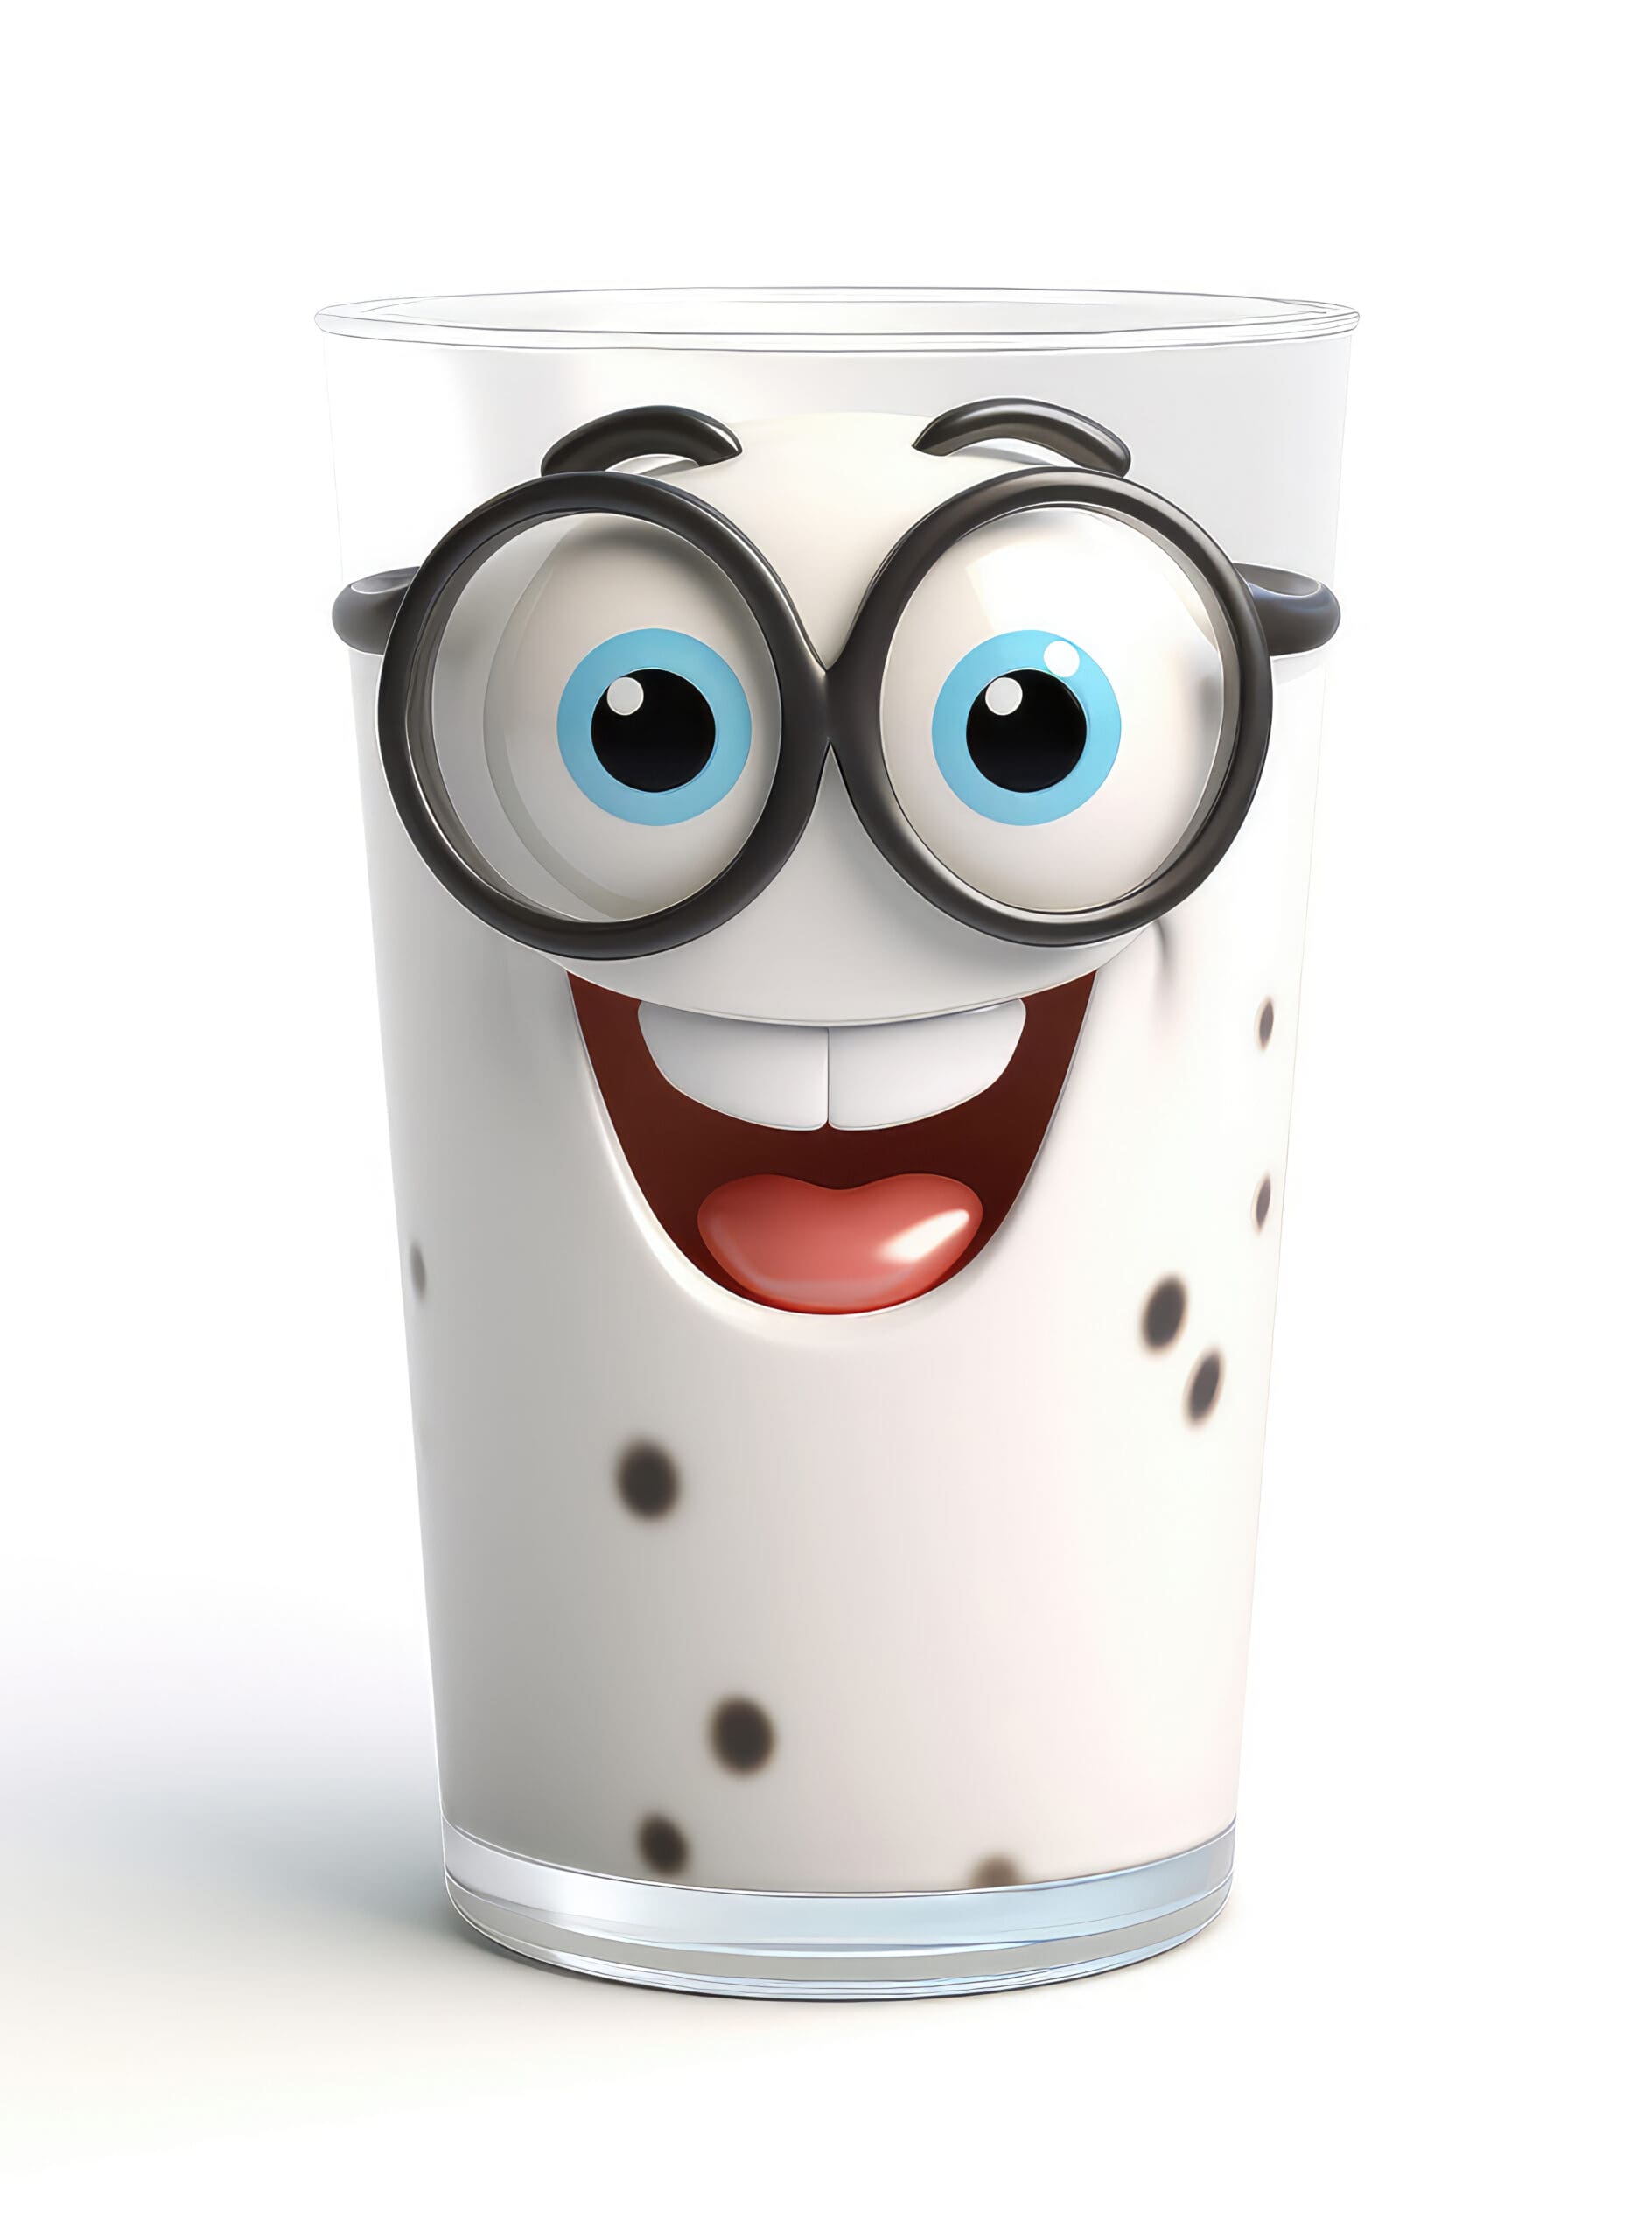 Cartoon graphic of a satisfied yogurt cup with a spoon waving goodbye on a yogurt-themed background.